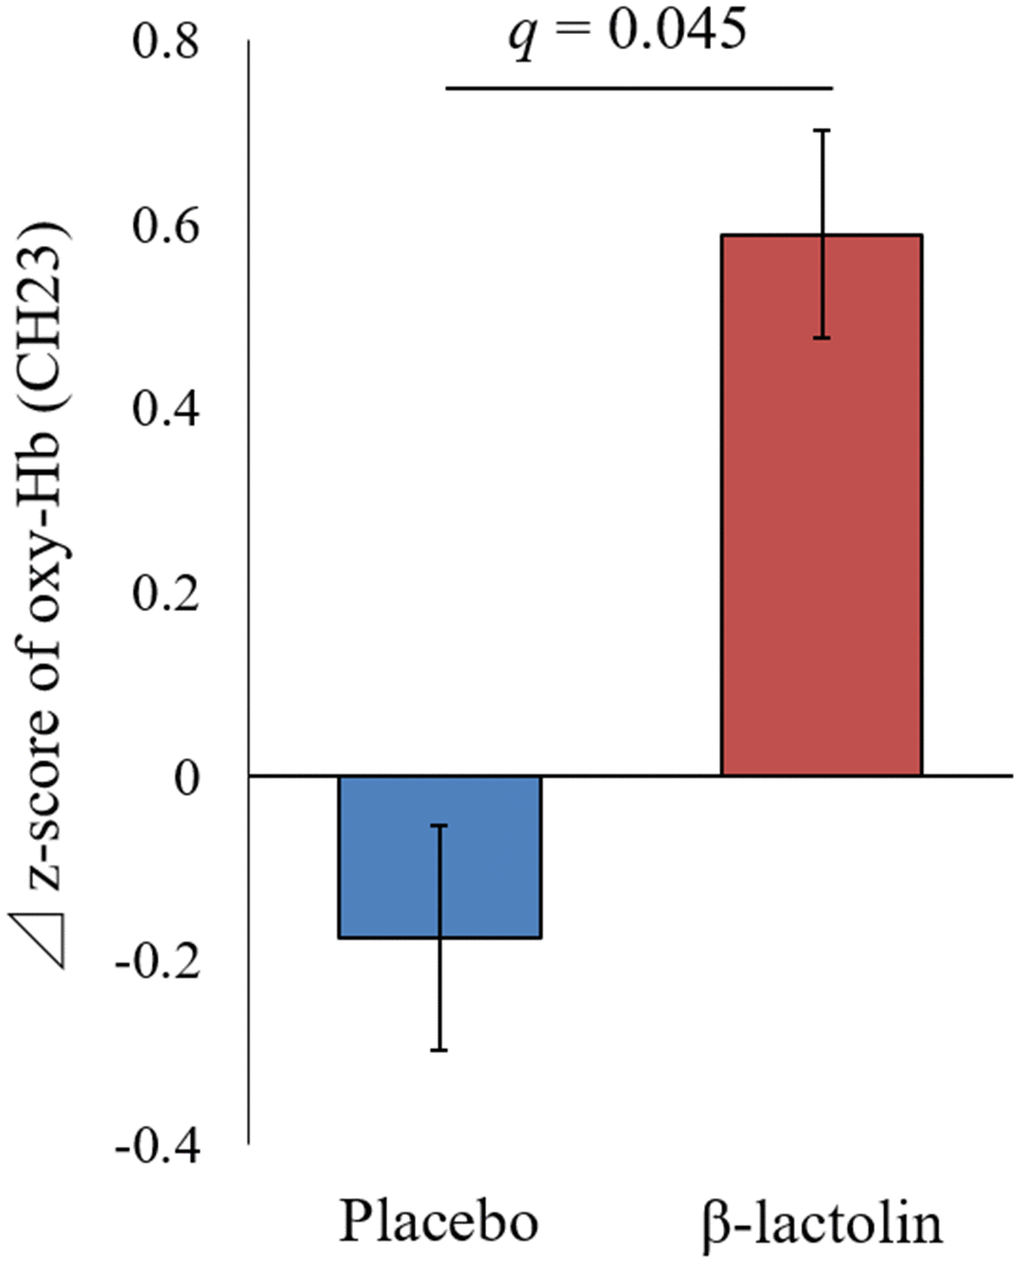 Changes of the oxy-Hb levels during spatial working memory in the left DLPFC. Oxy-Hb measurement at weeks 0 and 6 and changes between weeks 0 and 6 in CH23 during the spatial working memory task. Data are presented as means and ± standard errors for the placebo (n = 25) and the β-lactolin group (n = 24). Group differences were identified using ANOVA and FDR correlation. A value q 